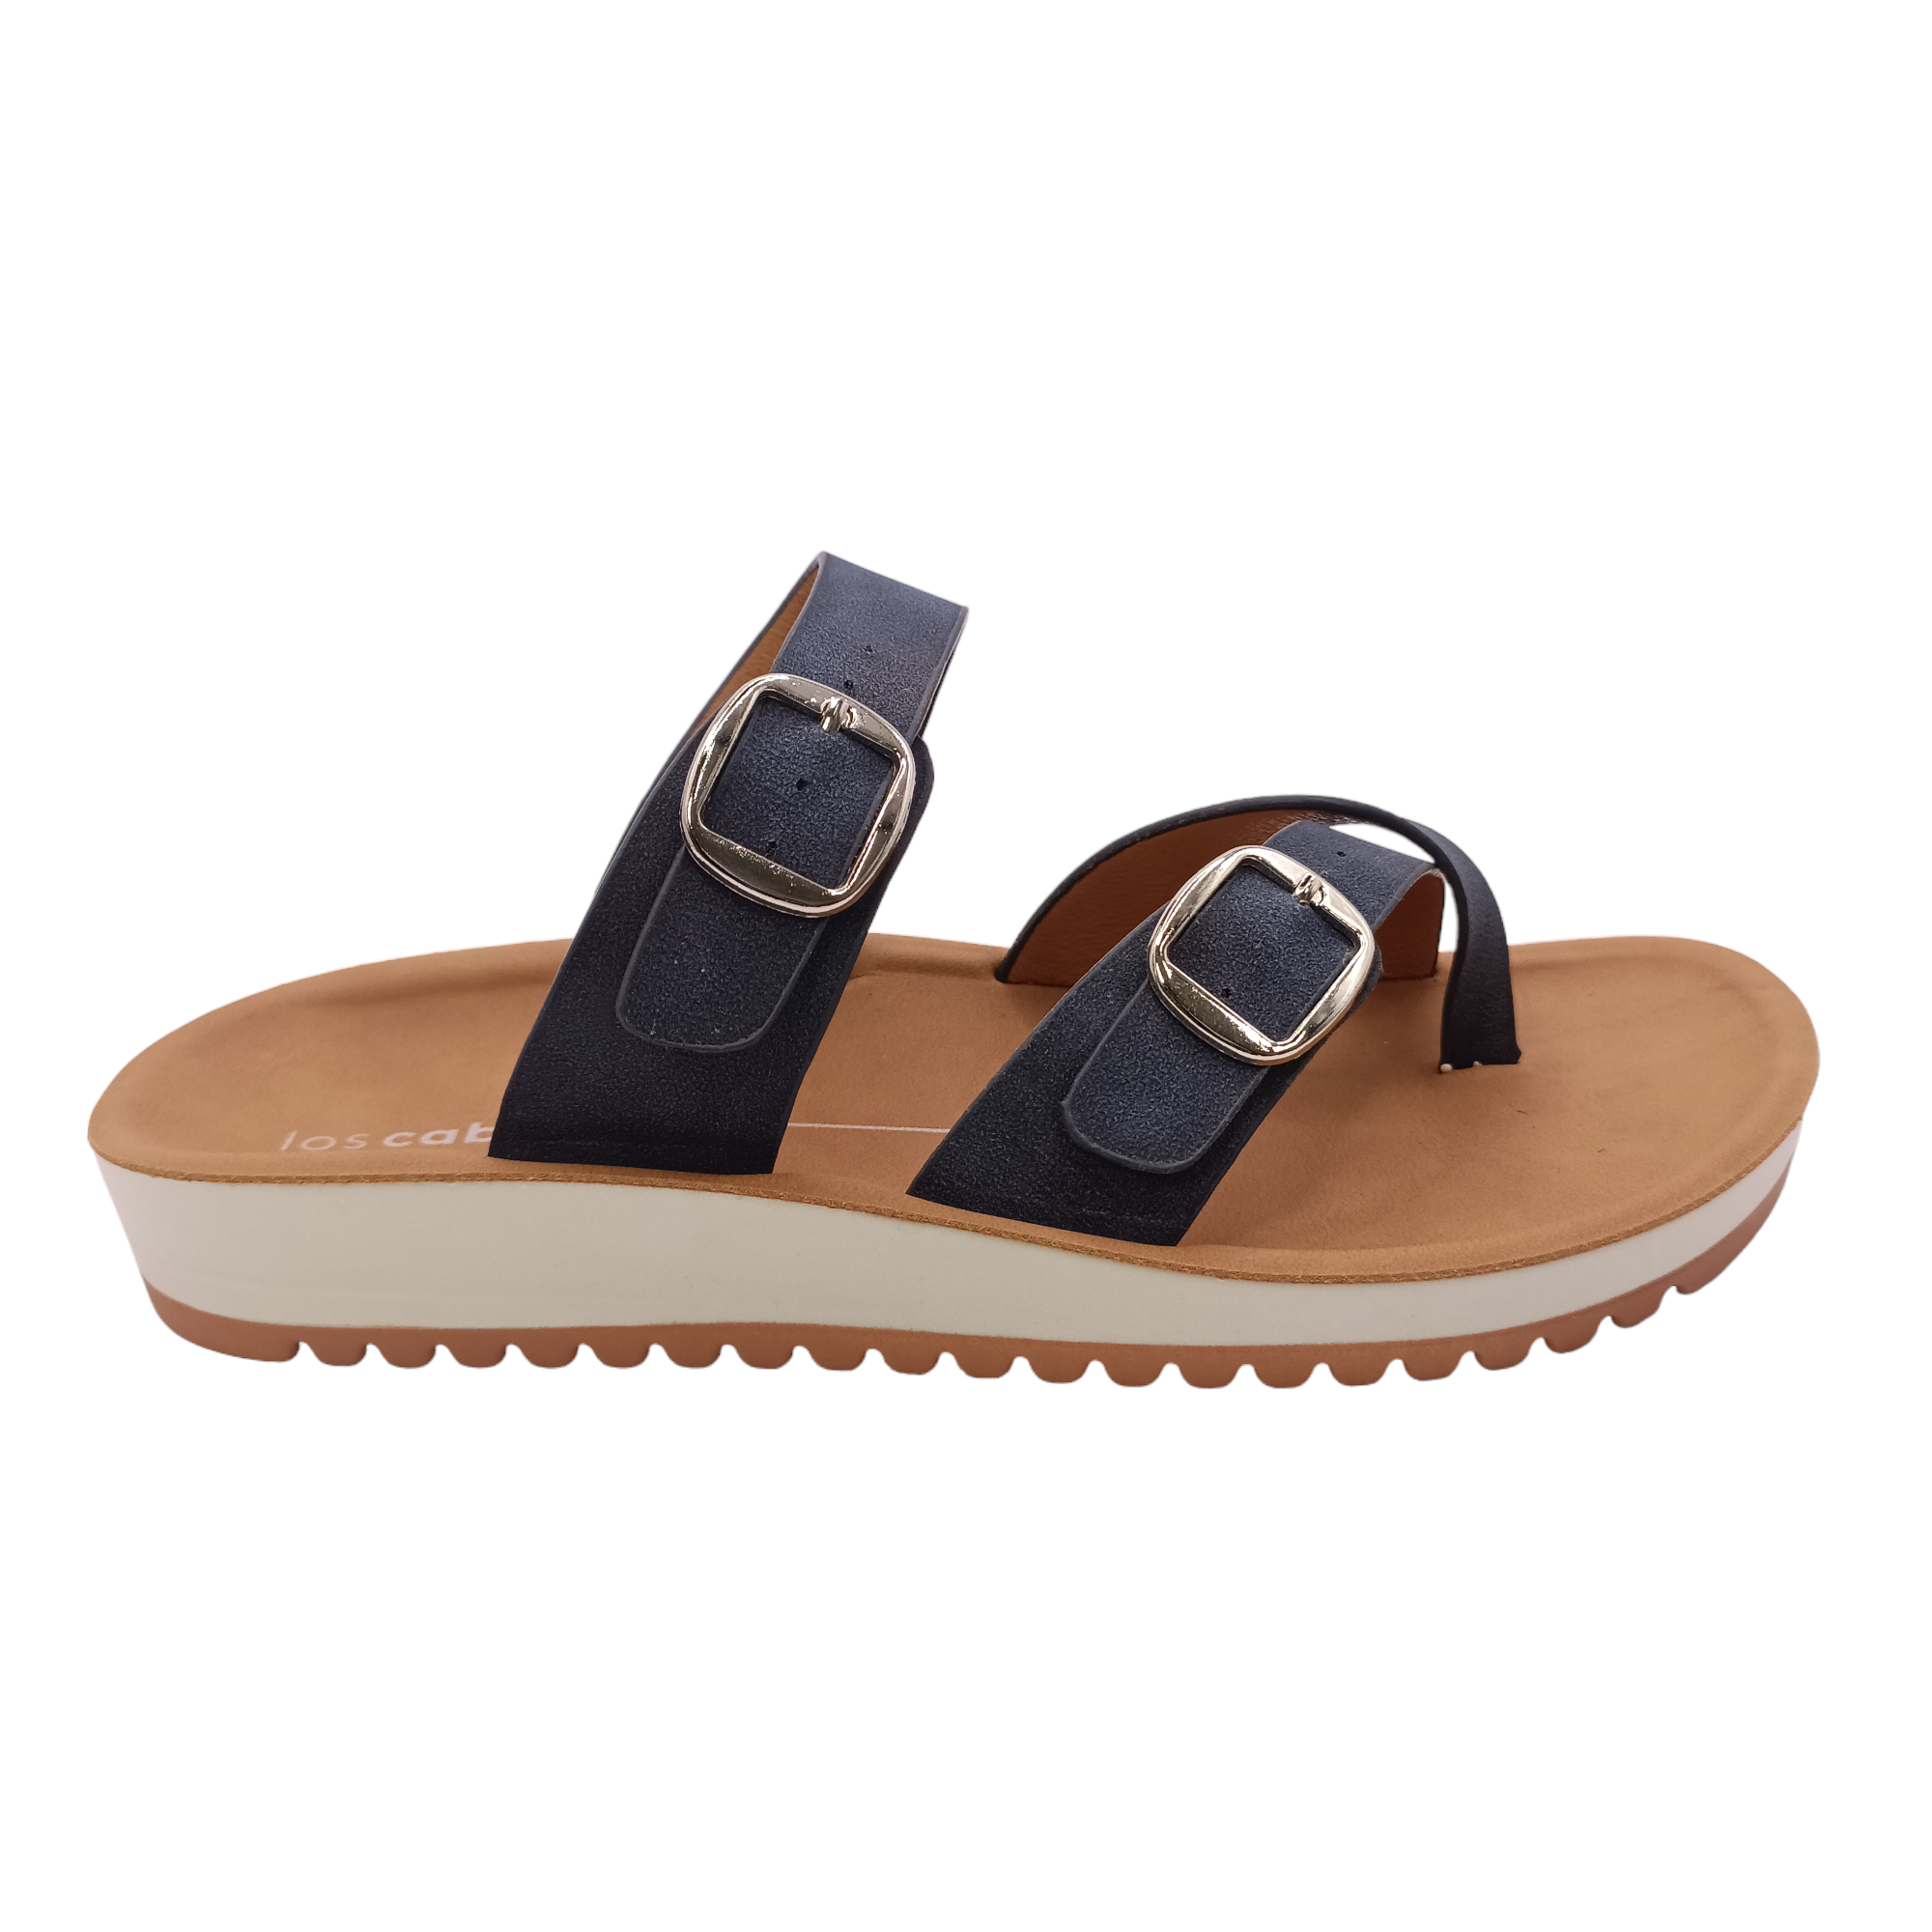 Nins - shoe&me - Los Cabos - Jandal - Jandals, Summer, Womens